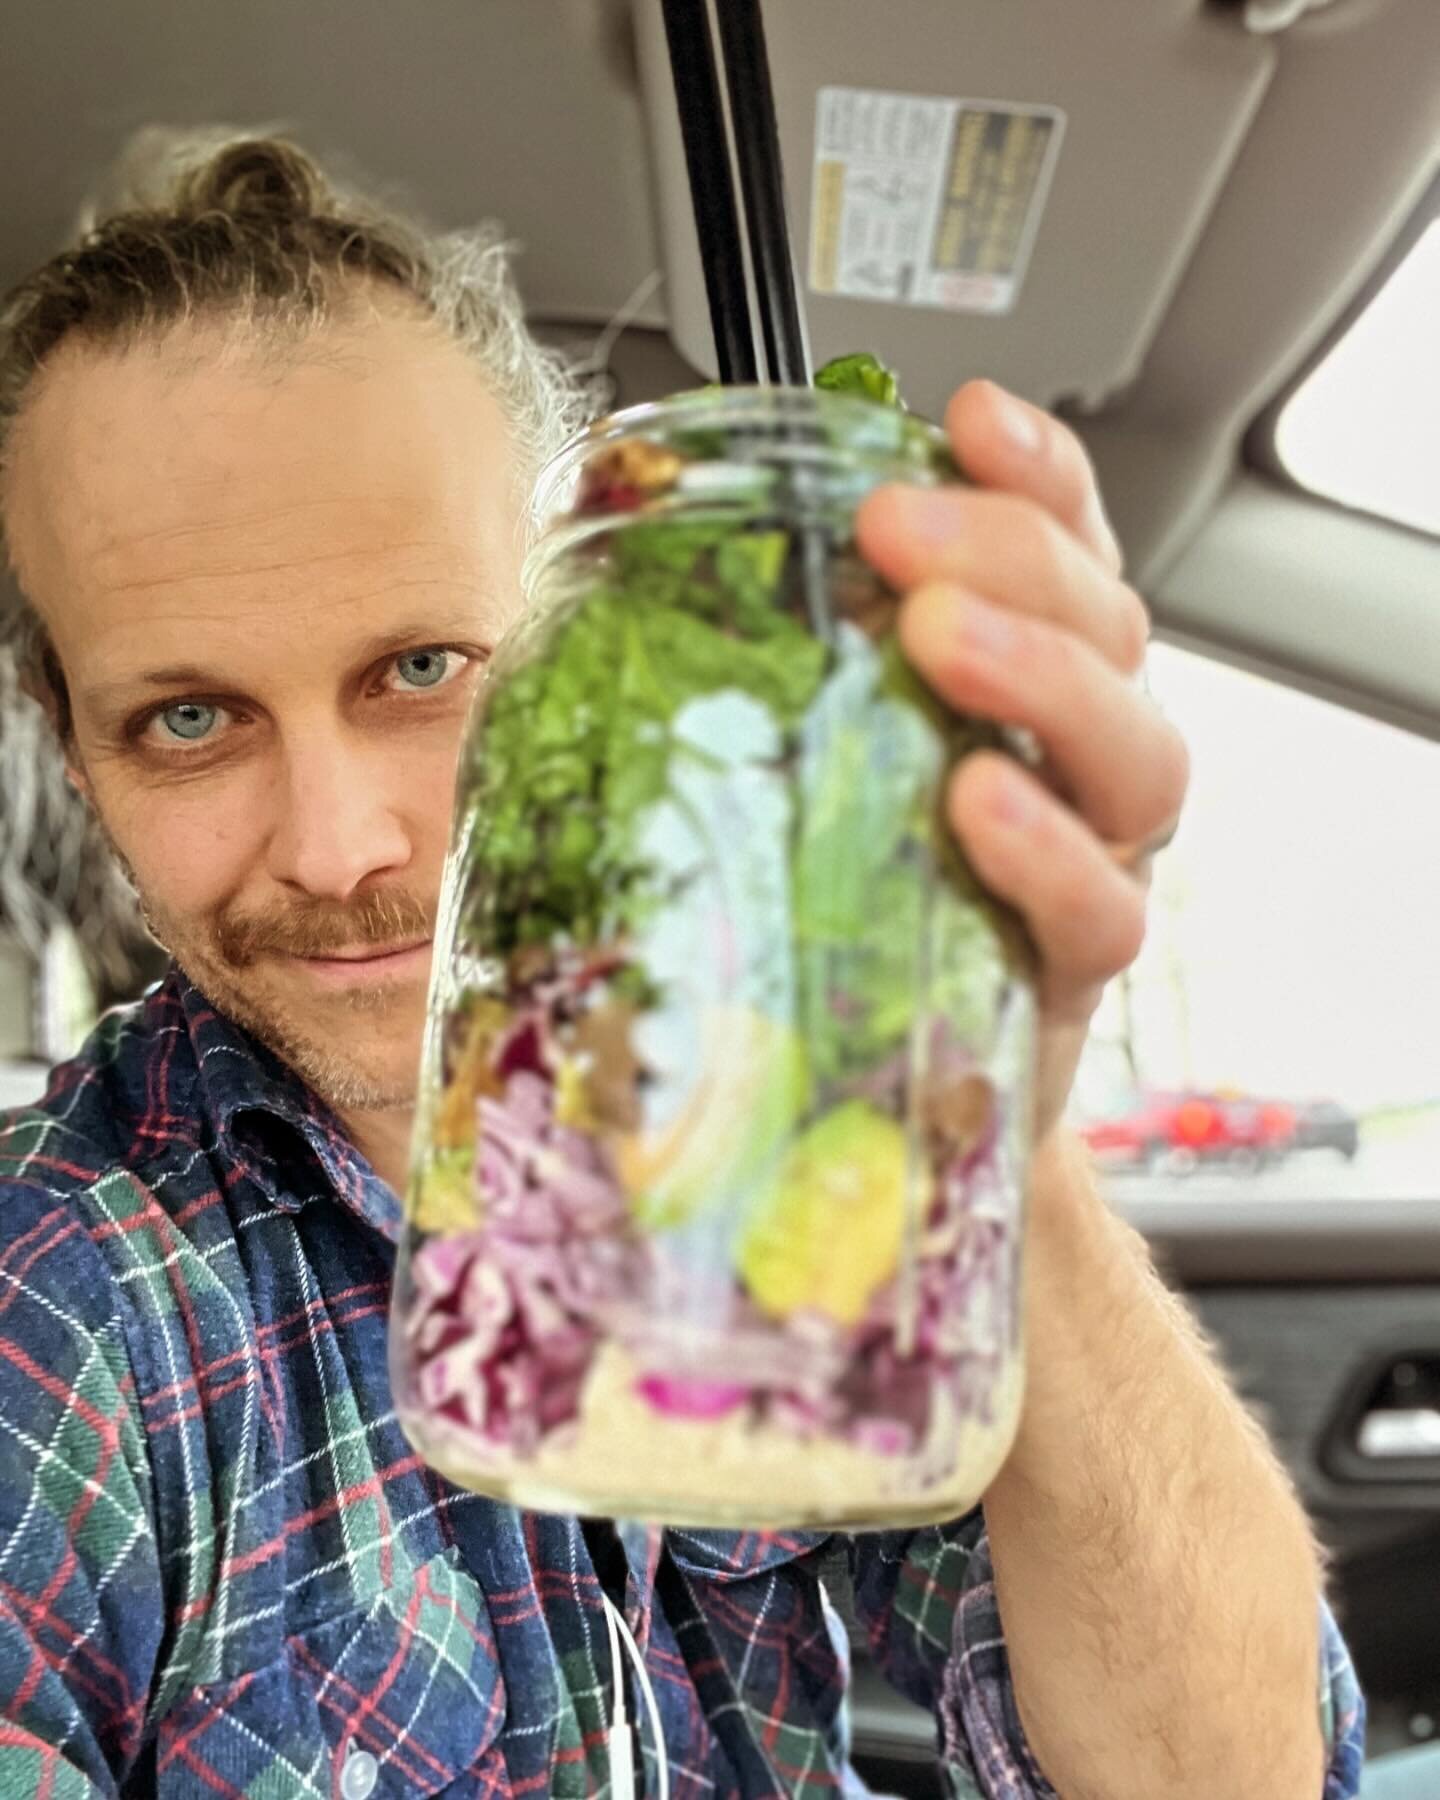 Eating well on the road is definitely one of the biggest challenges of this touring life.  @tourmamasuz knocked it out of the park with this mason jar salad (fresh greens from our garden + avocado + cabbage + olives + tofu salad). 

Apr 3 - Appleton,